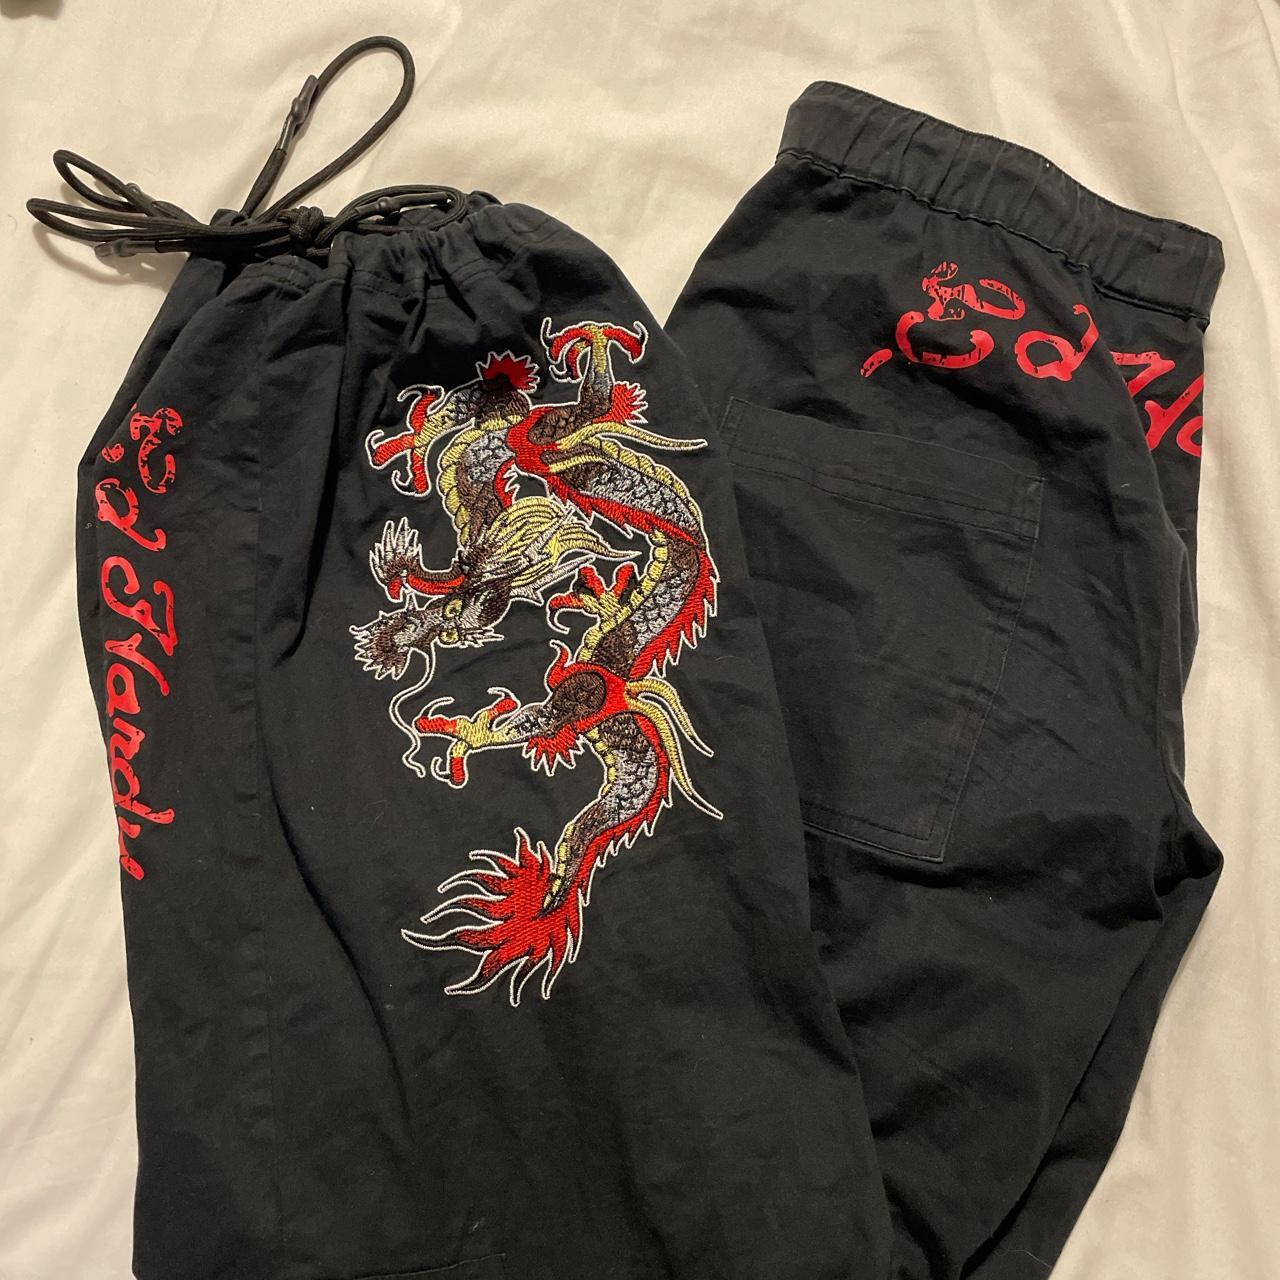 Ed Hardy X Urban Outfitters cargos, Msg offers - Depop